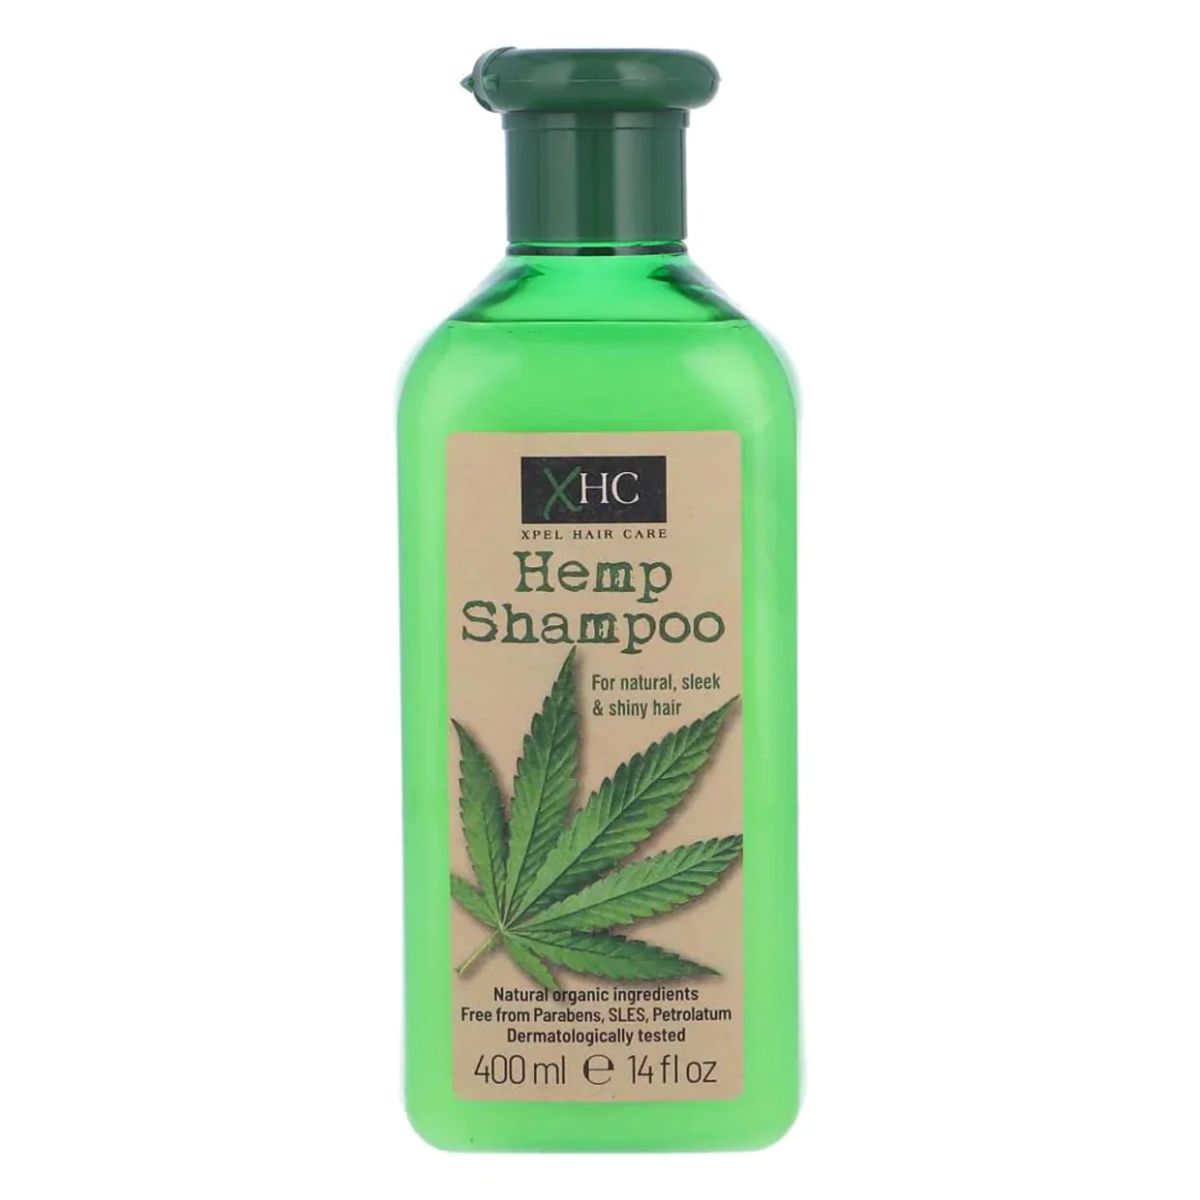 Sentence with product name: A bottle of XHC Hemp Shampoo - 400ml for natural, sleek, and shiny hair.